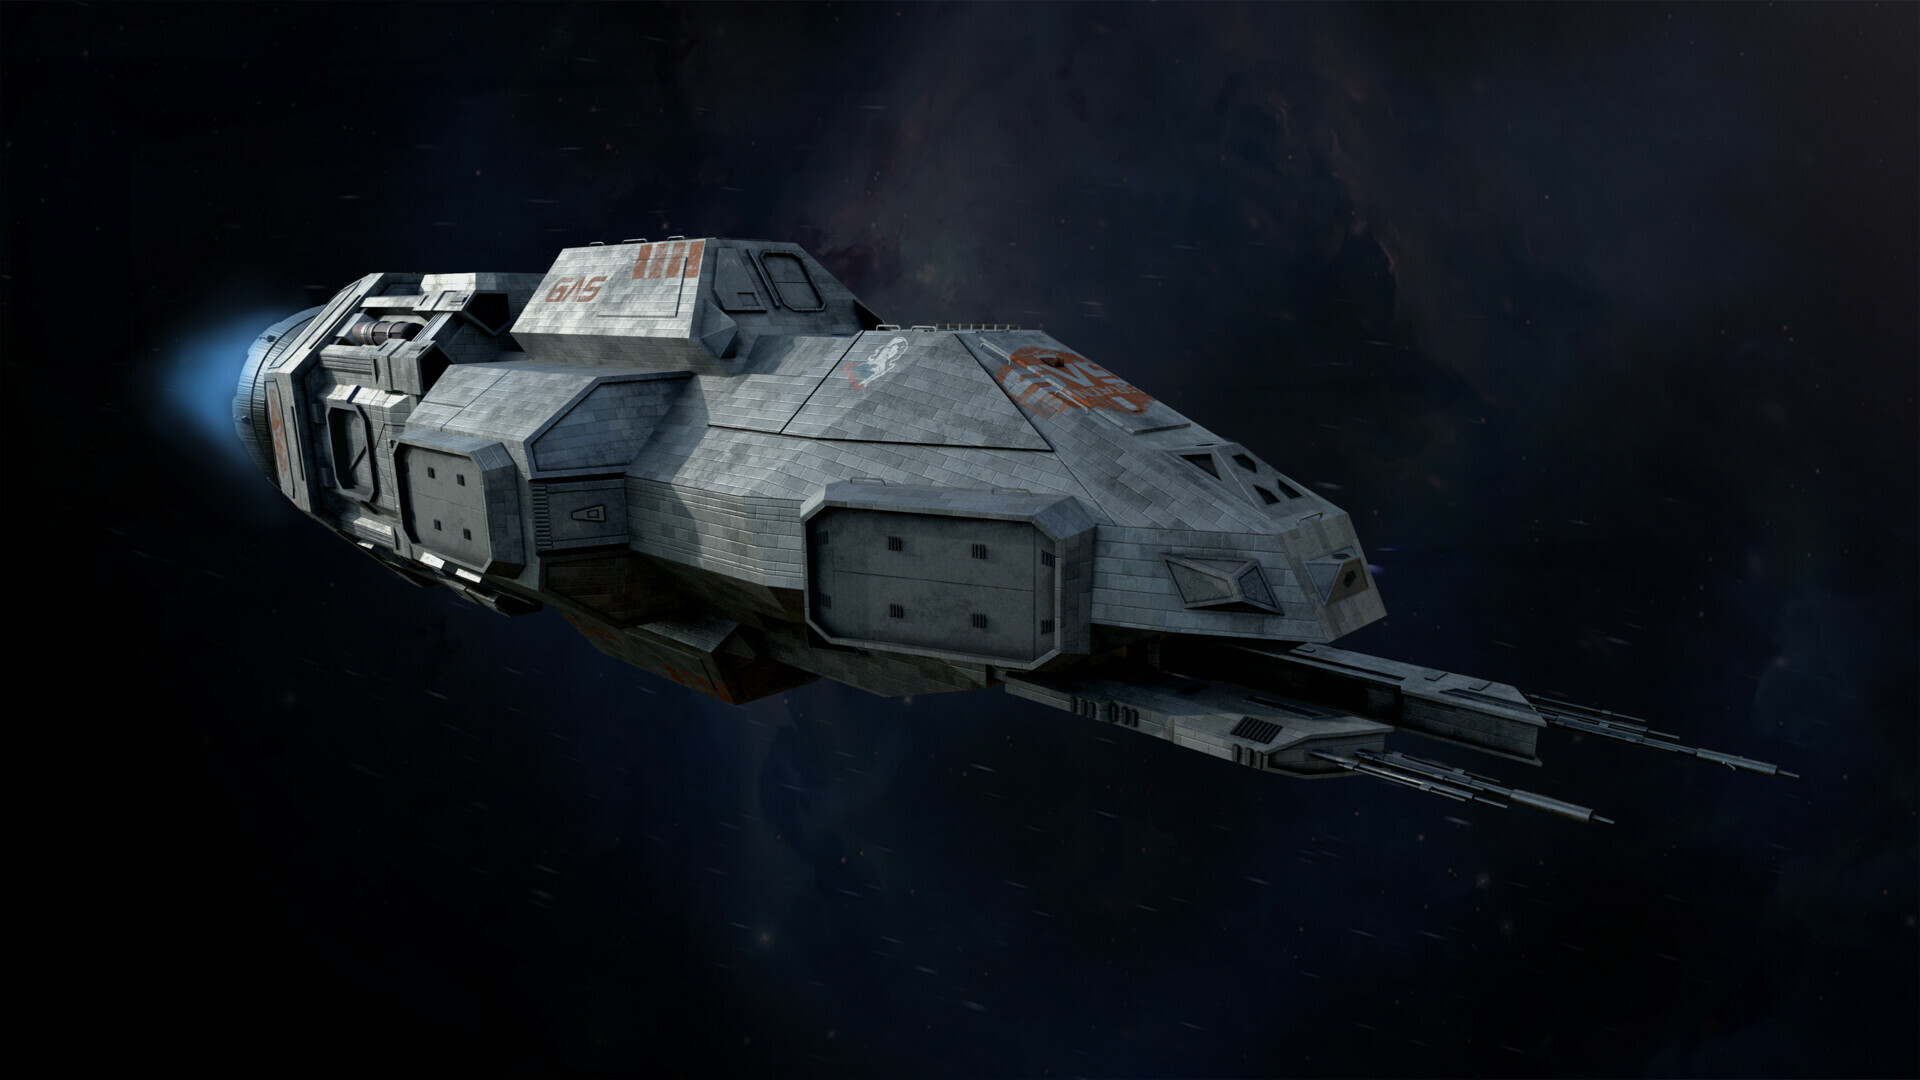 The Expanse: Rocinante, Roci, A Corvette-class light frigate with multiple roles. 1920x1080 Full HD Background.